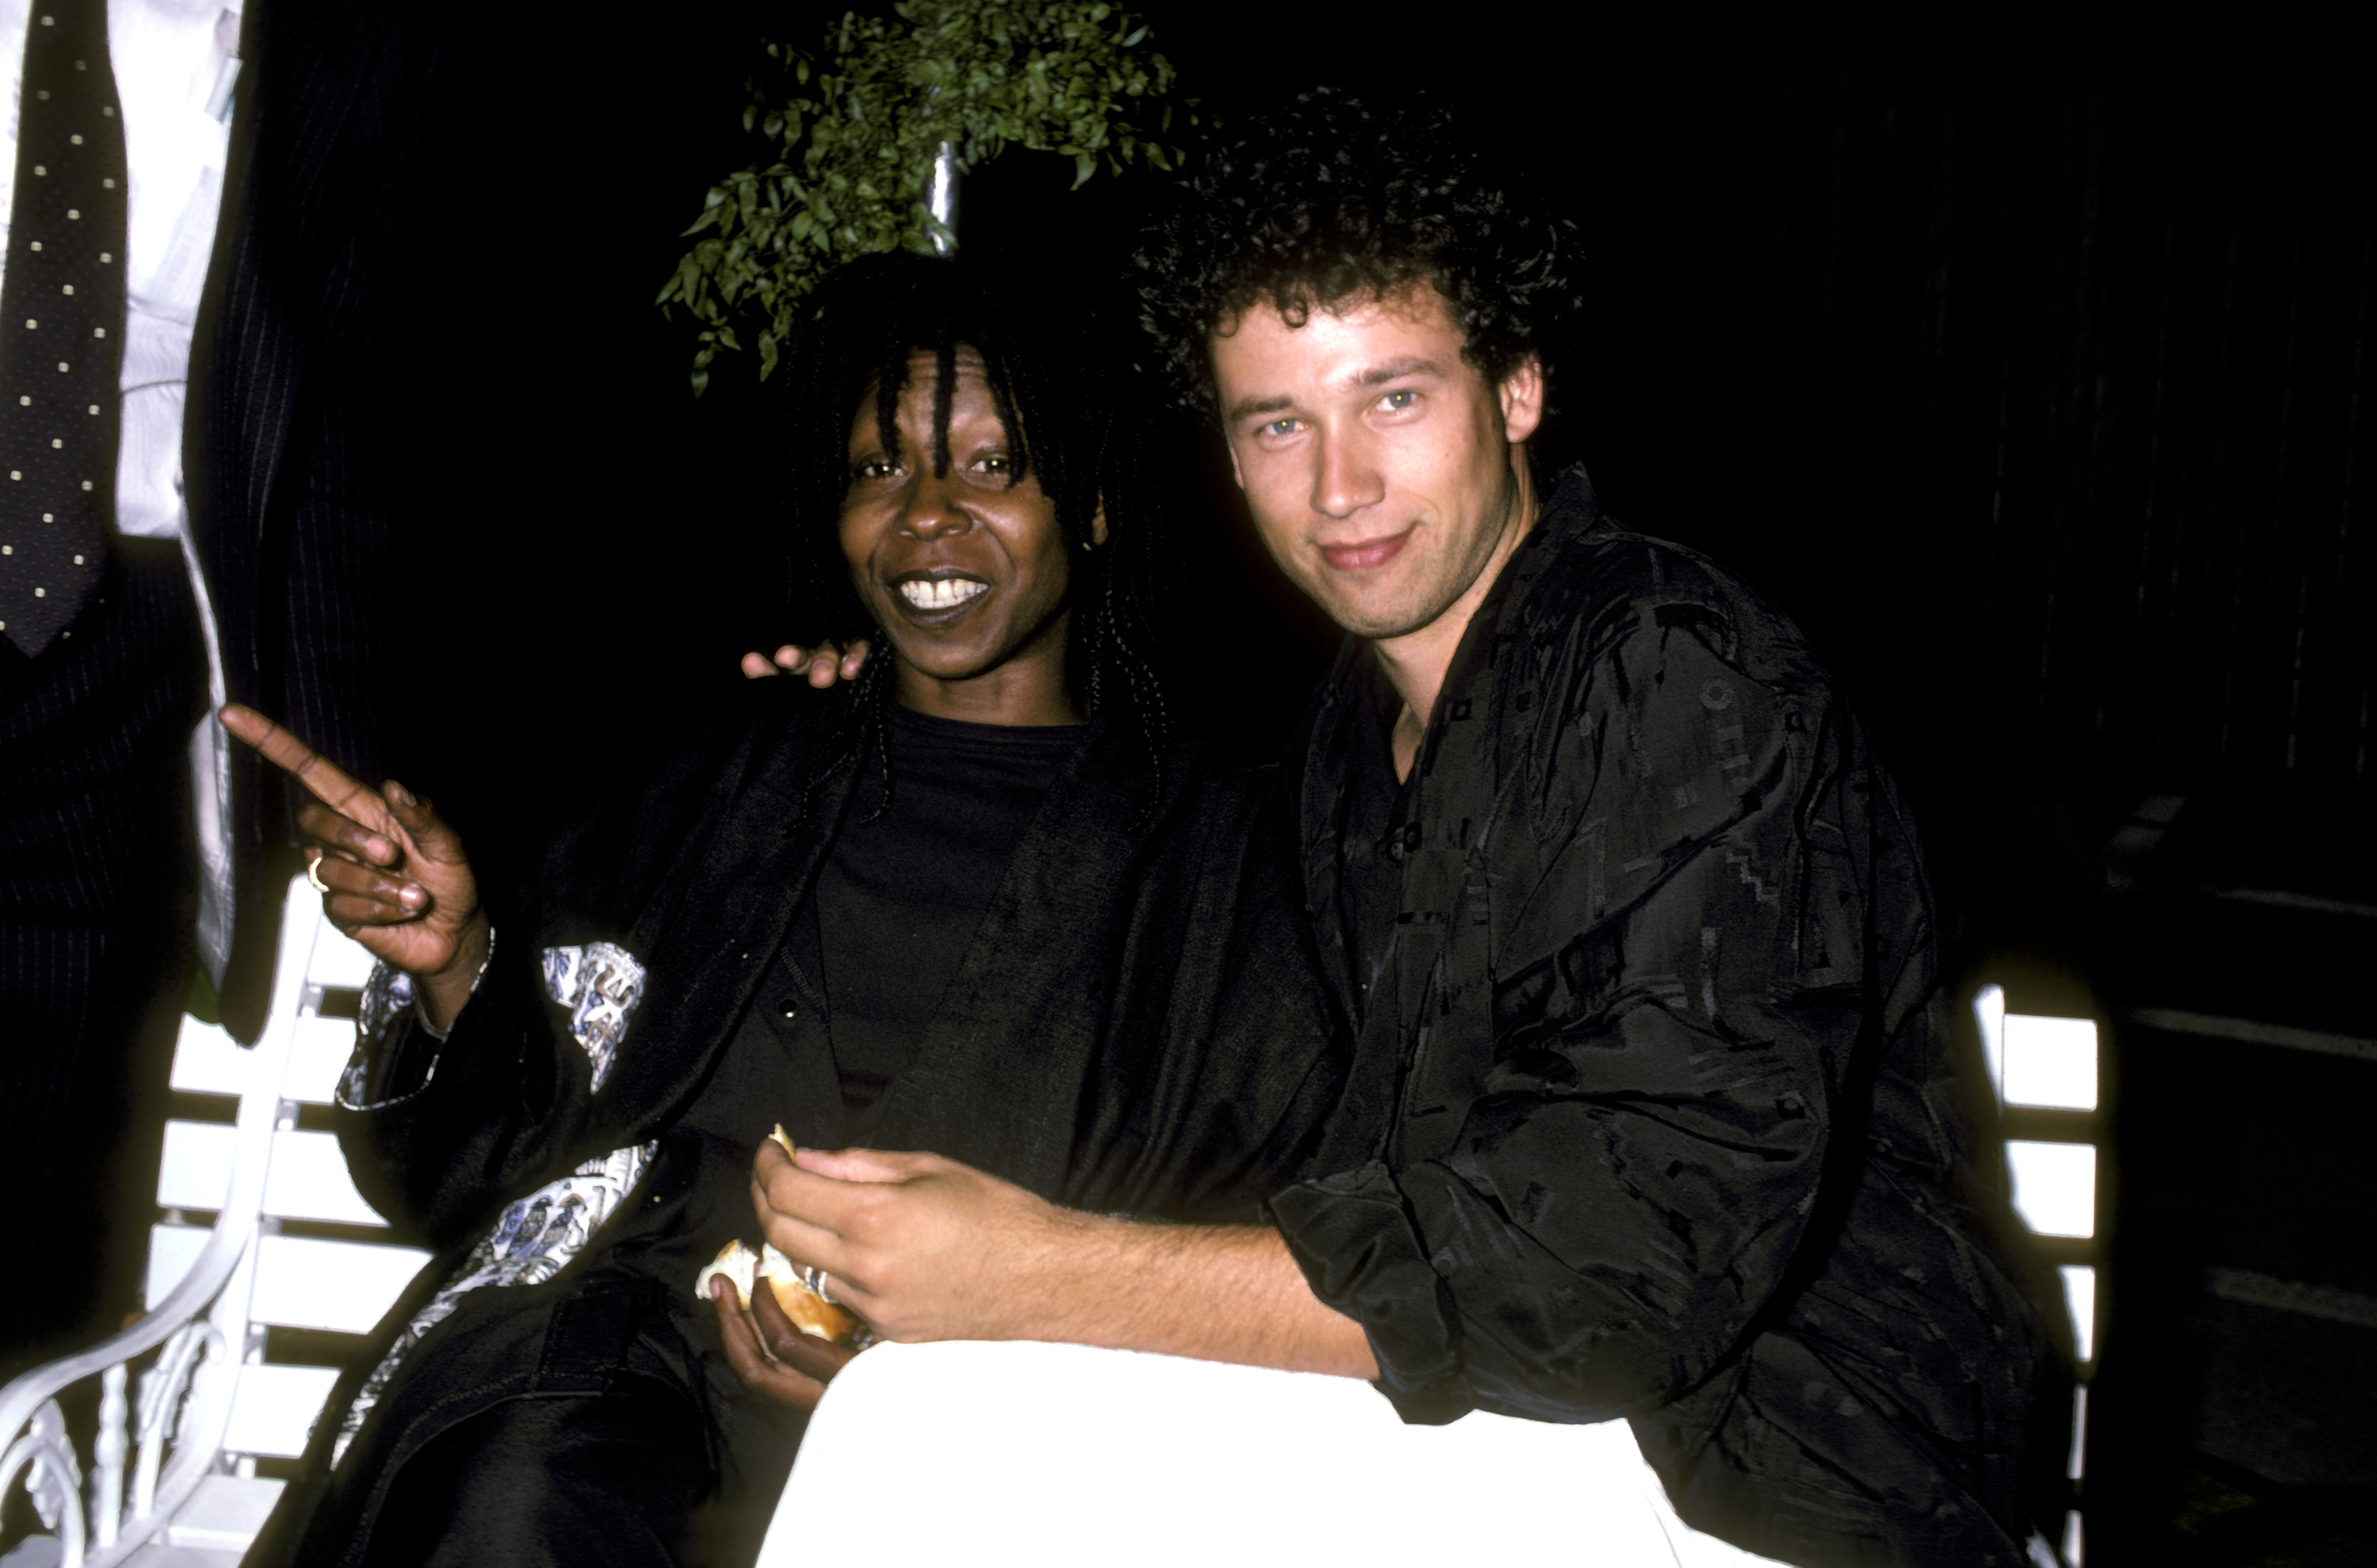 Whoopi Goldberg and David Claessen at the 5th Annual "L'Chaim, To Life!" Telethon in 1986 | Source: Getty Images